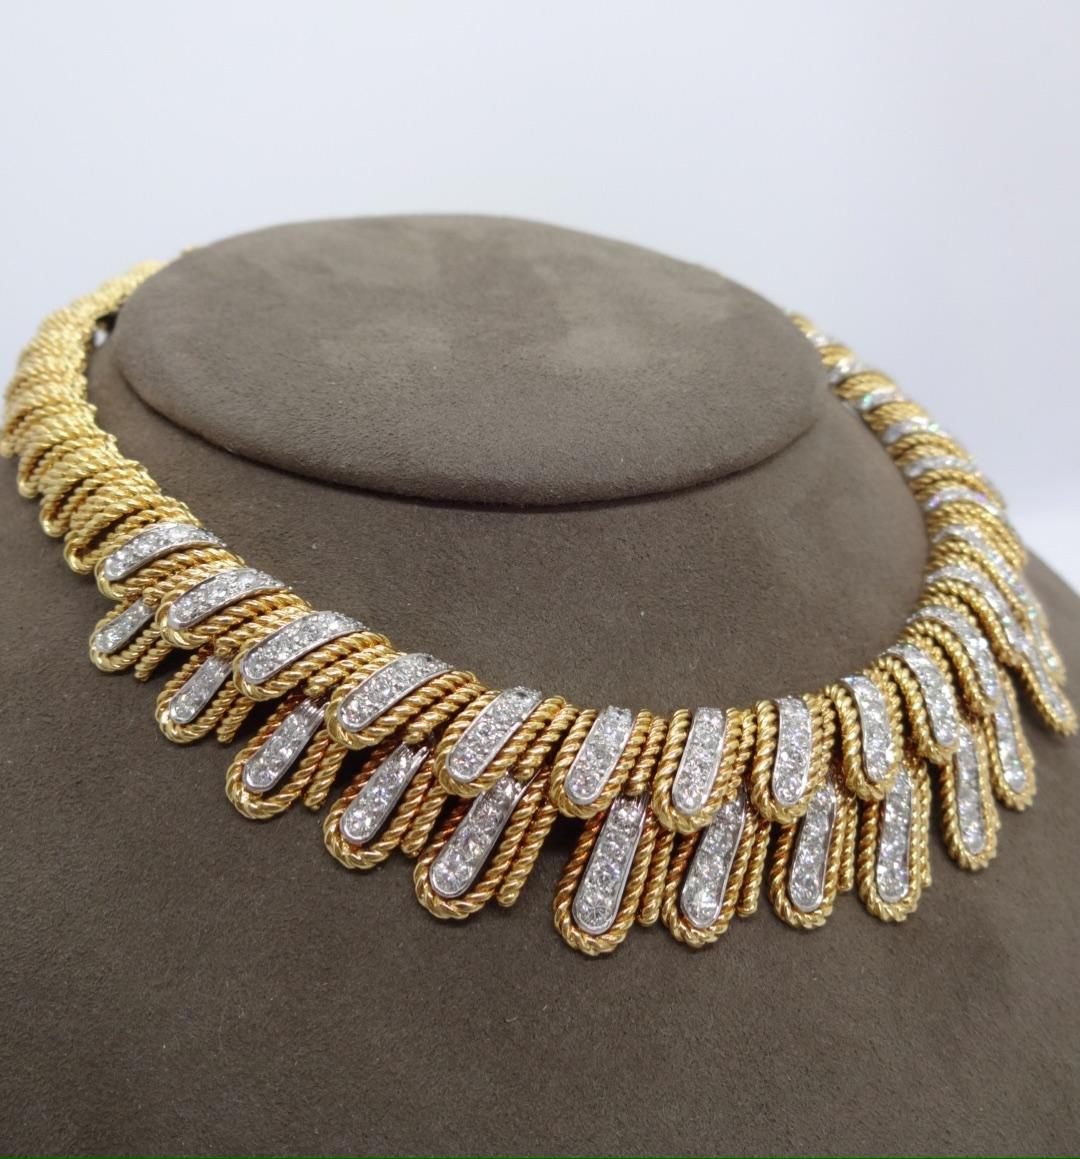 Over 10 carats (approximately 10.85) of round brilliant diamonds are set in platinum and 18K yellow gold layered, twisted wire feathered motif this stylish diamond necklace.  While it currently measures 13.75inches, it can easily be lengthened for